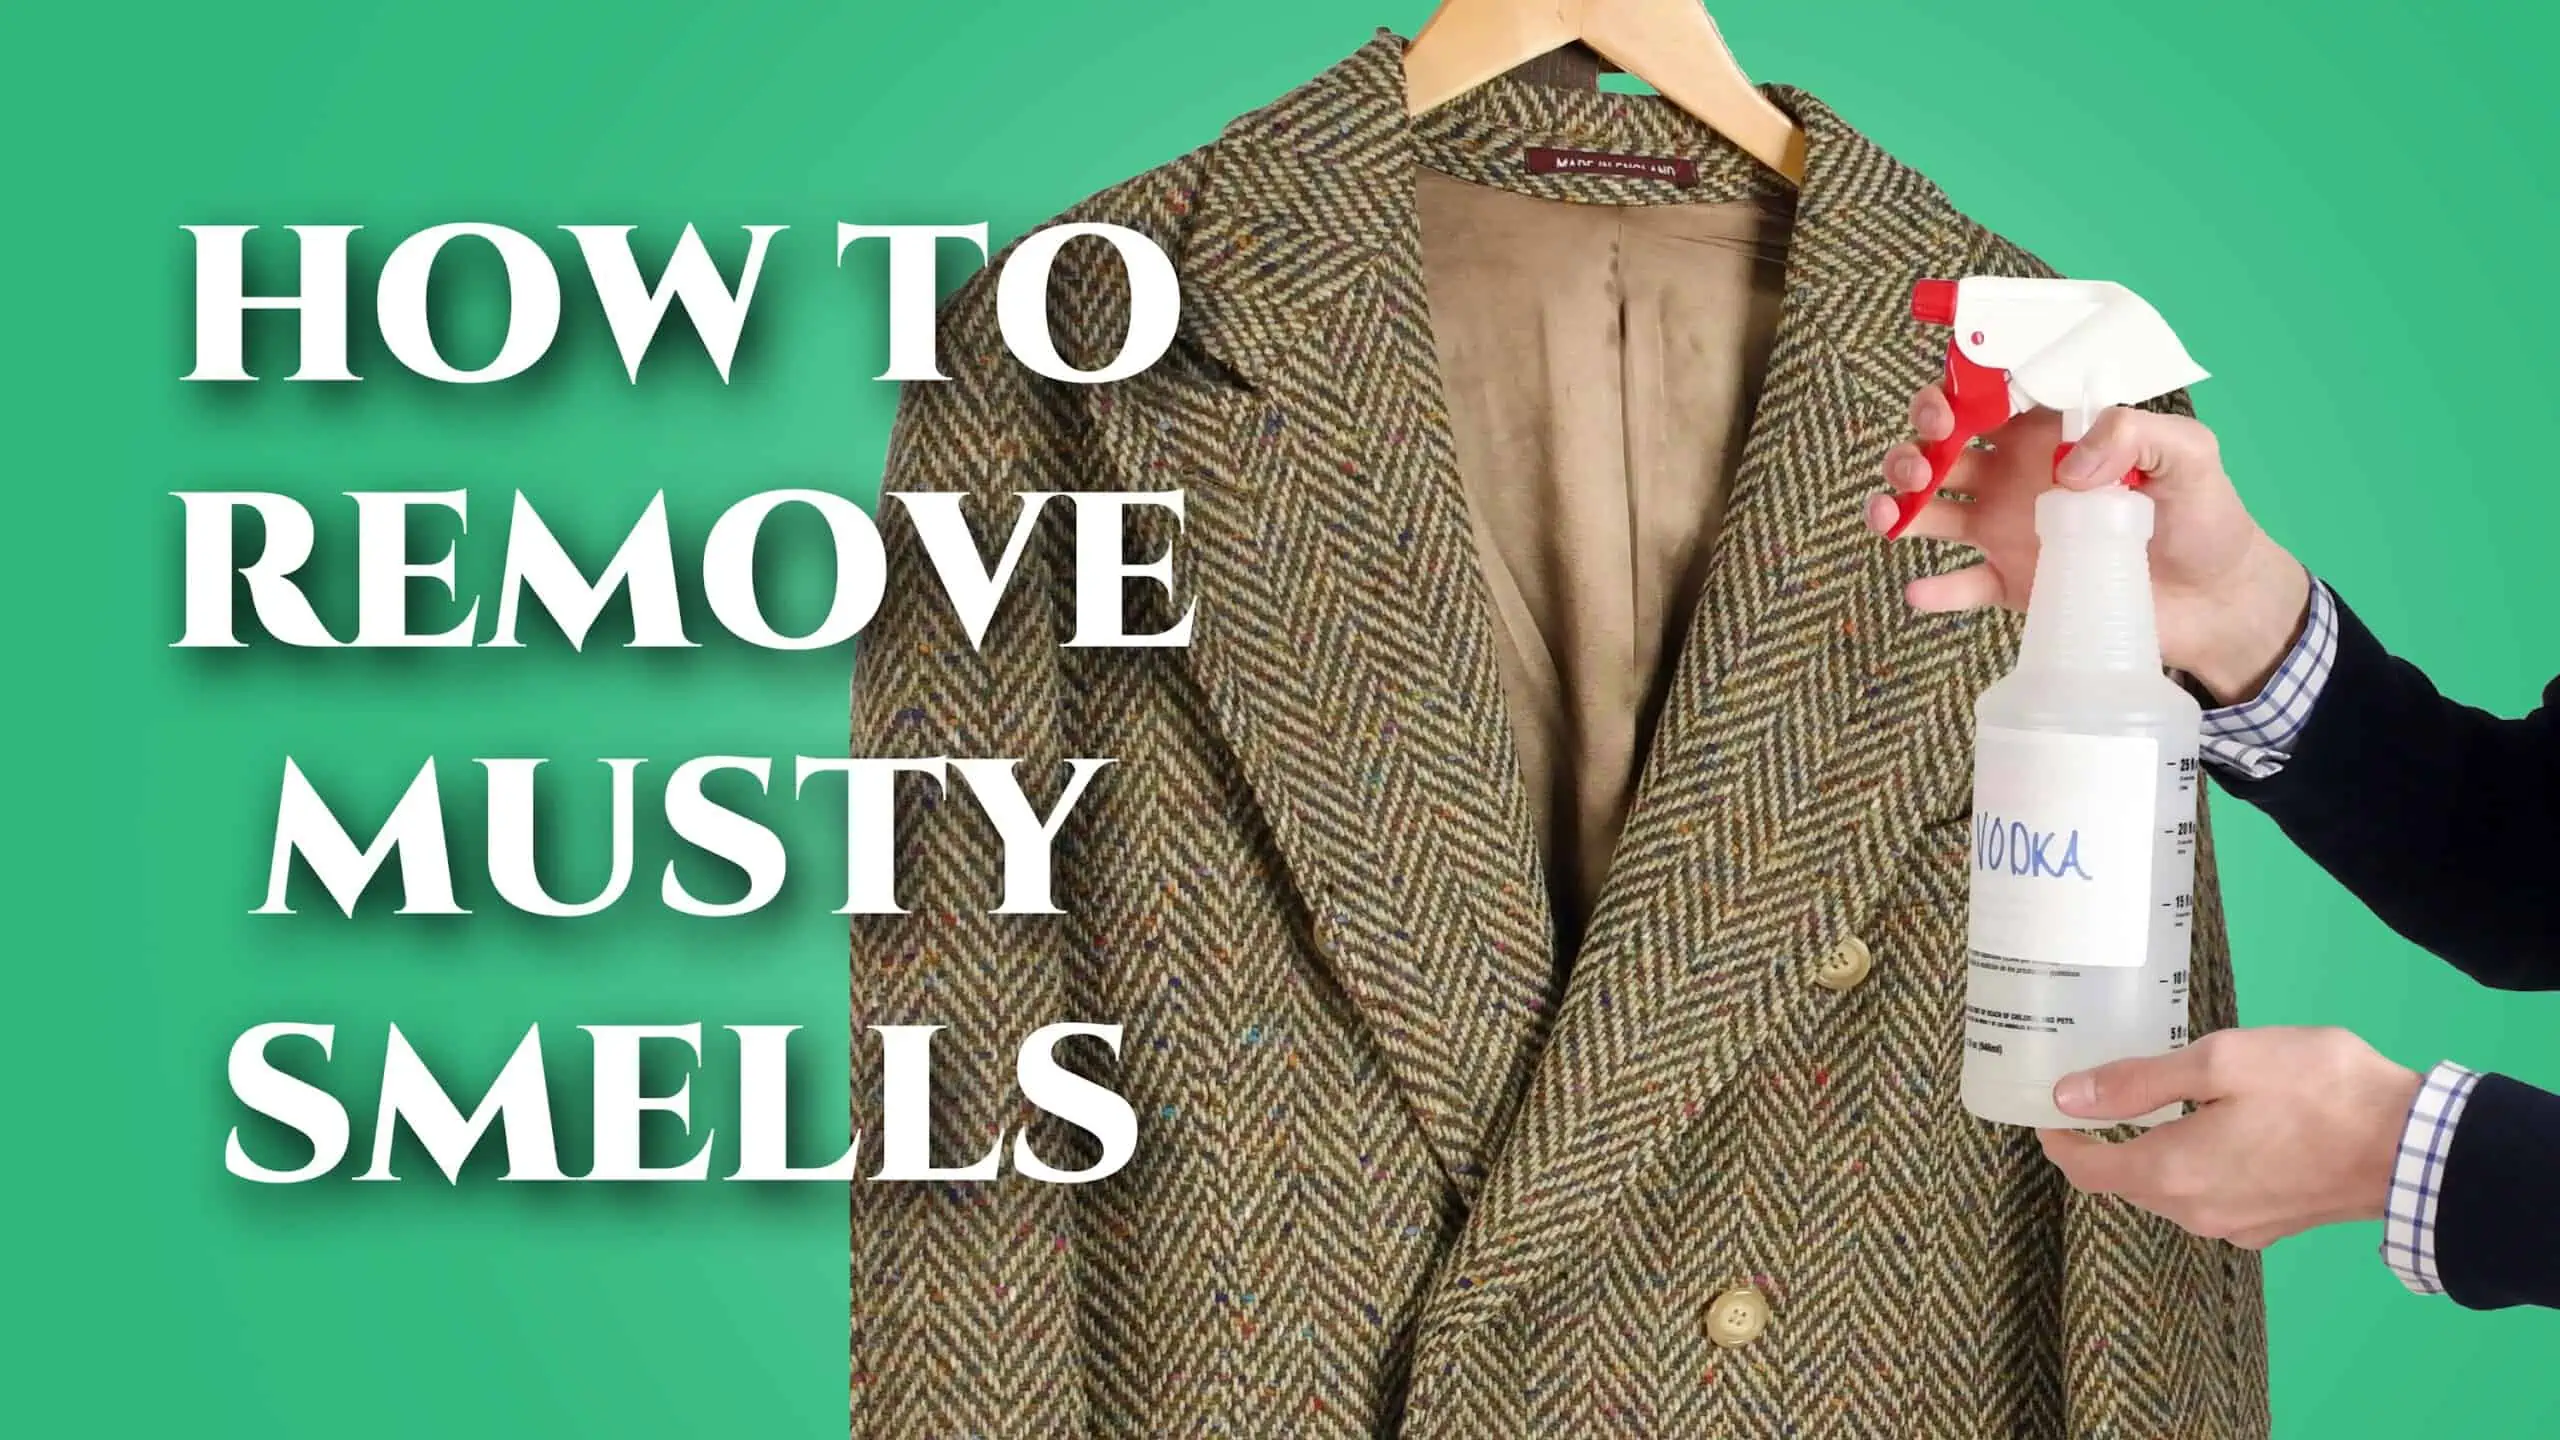 https://www.gentlemansgazette.com/wp-content/uploads/2019/02/how-to-remove-musty-smells_3840x2160-scaled.webp